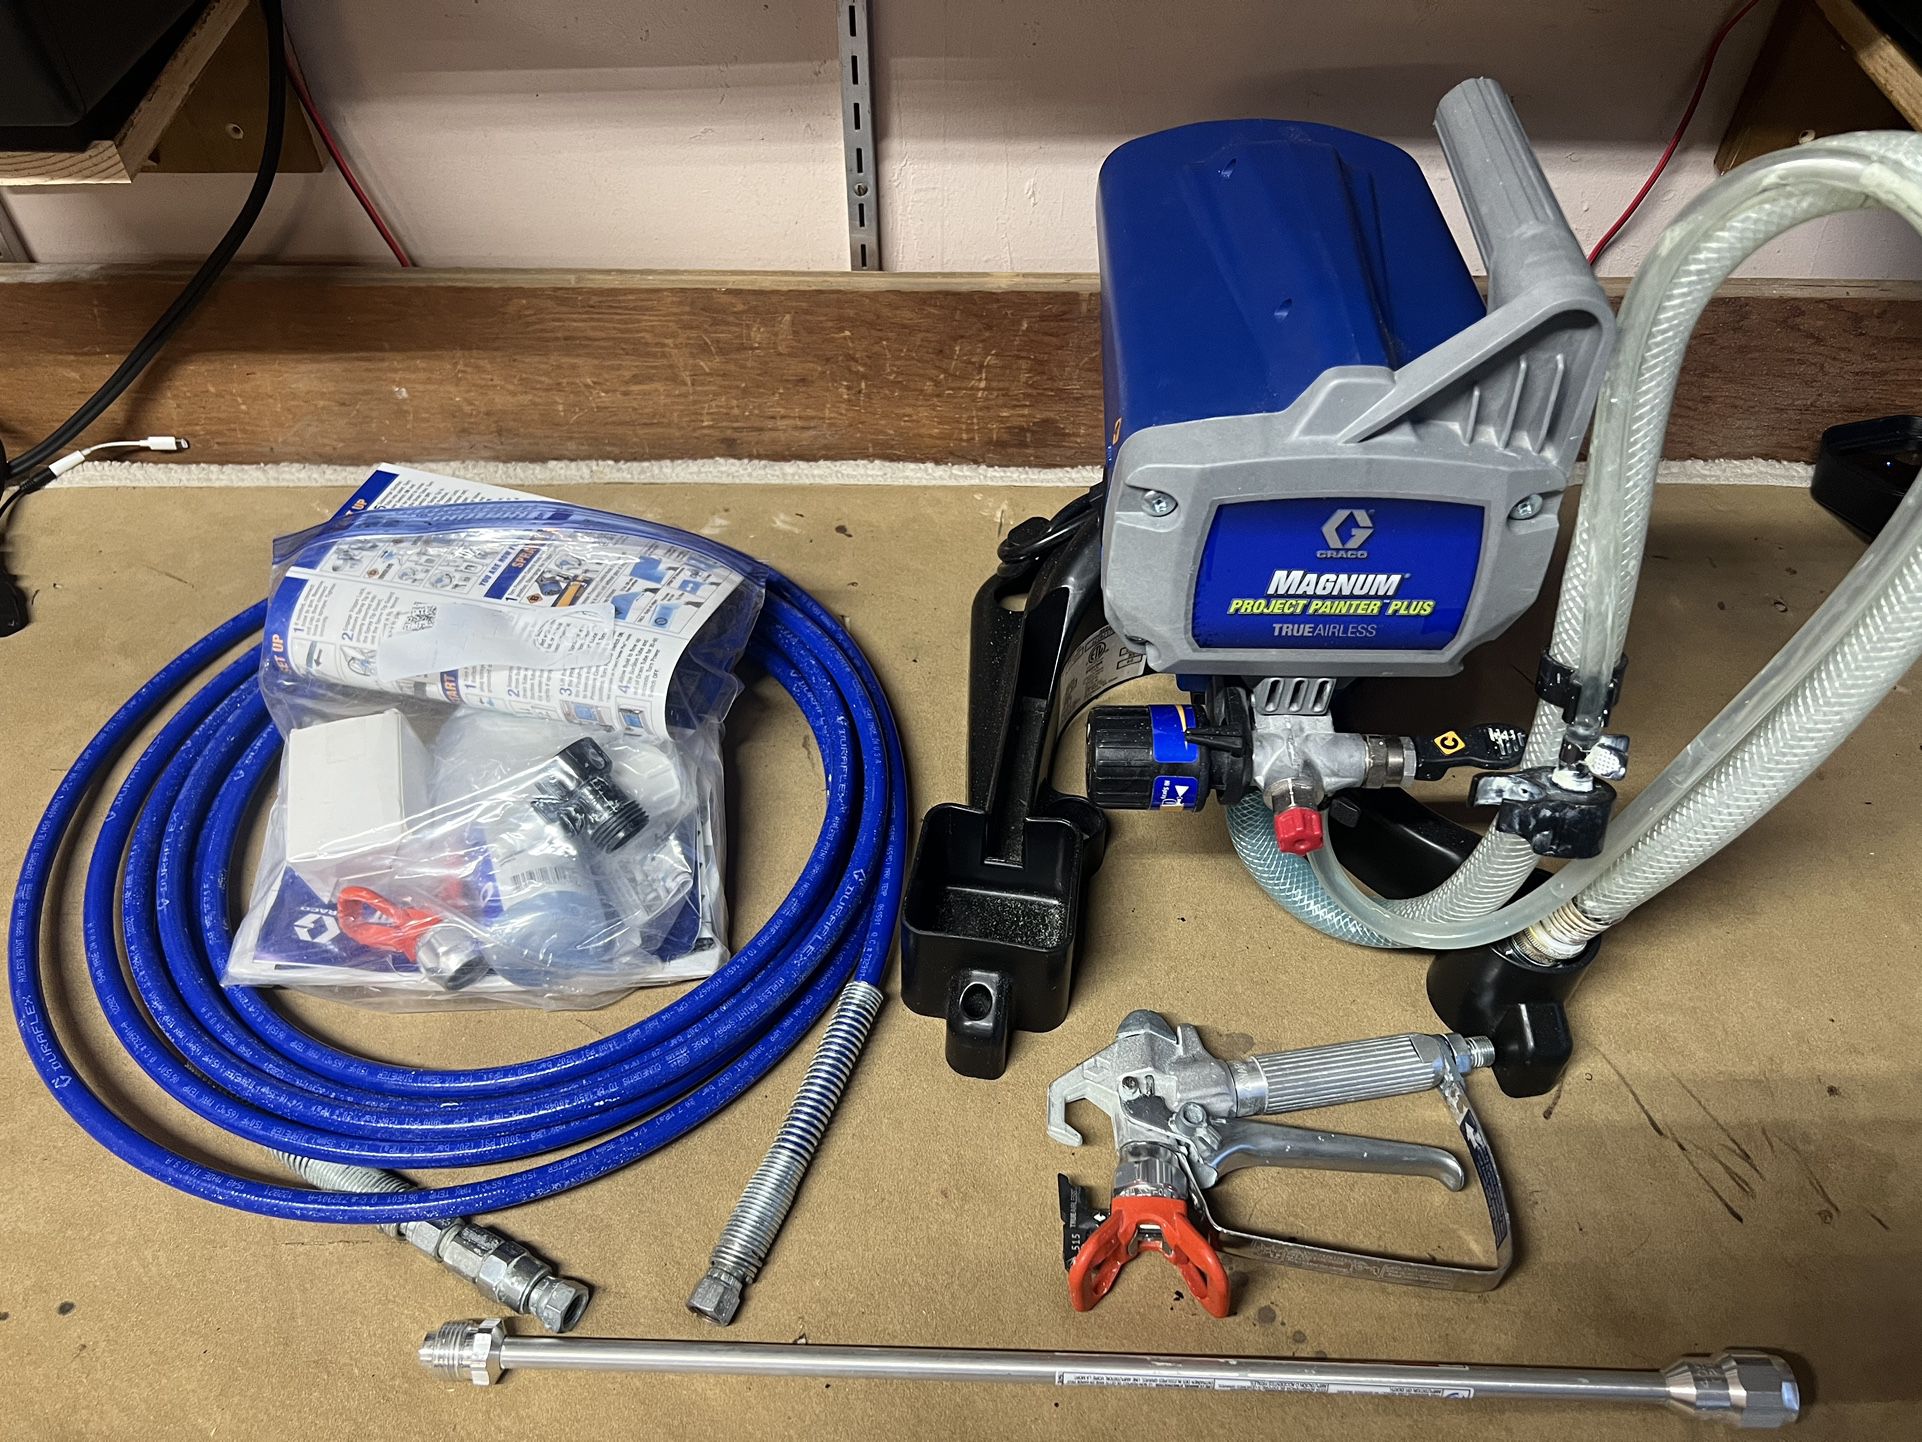 Graco Project Painter Plus Airless Paint Sprayer with Extras $185